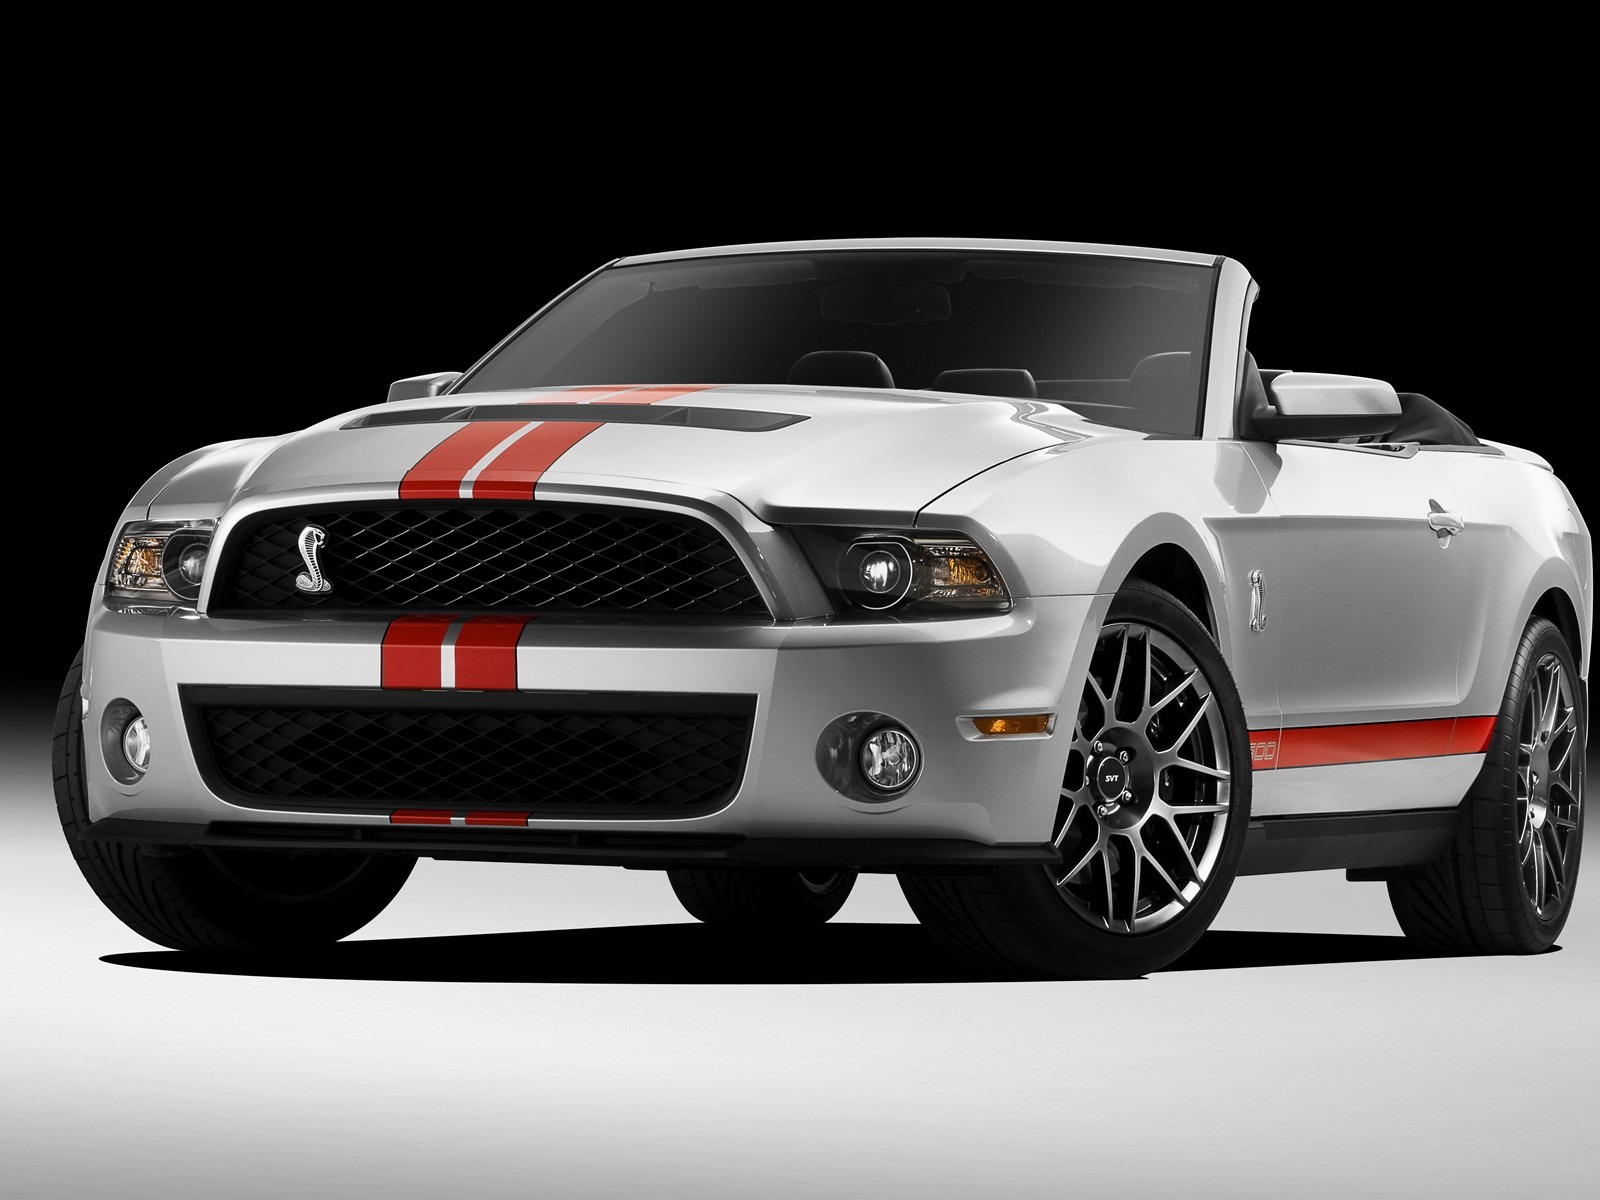 Ford Mustang GT500 Wallpapers #4 - 1600x1200